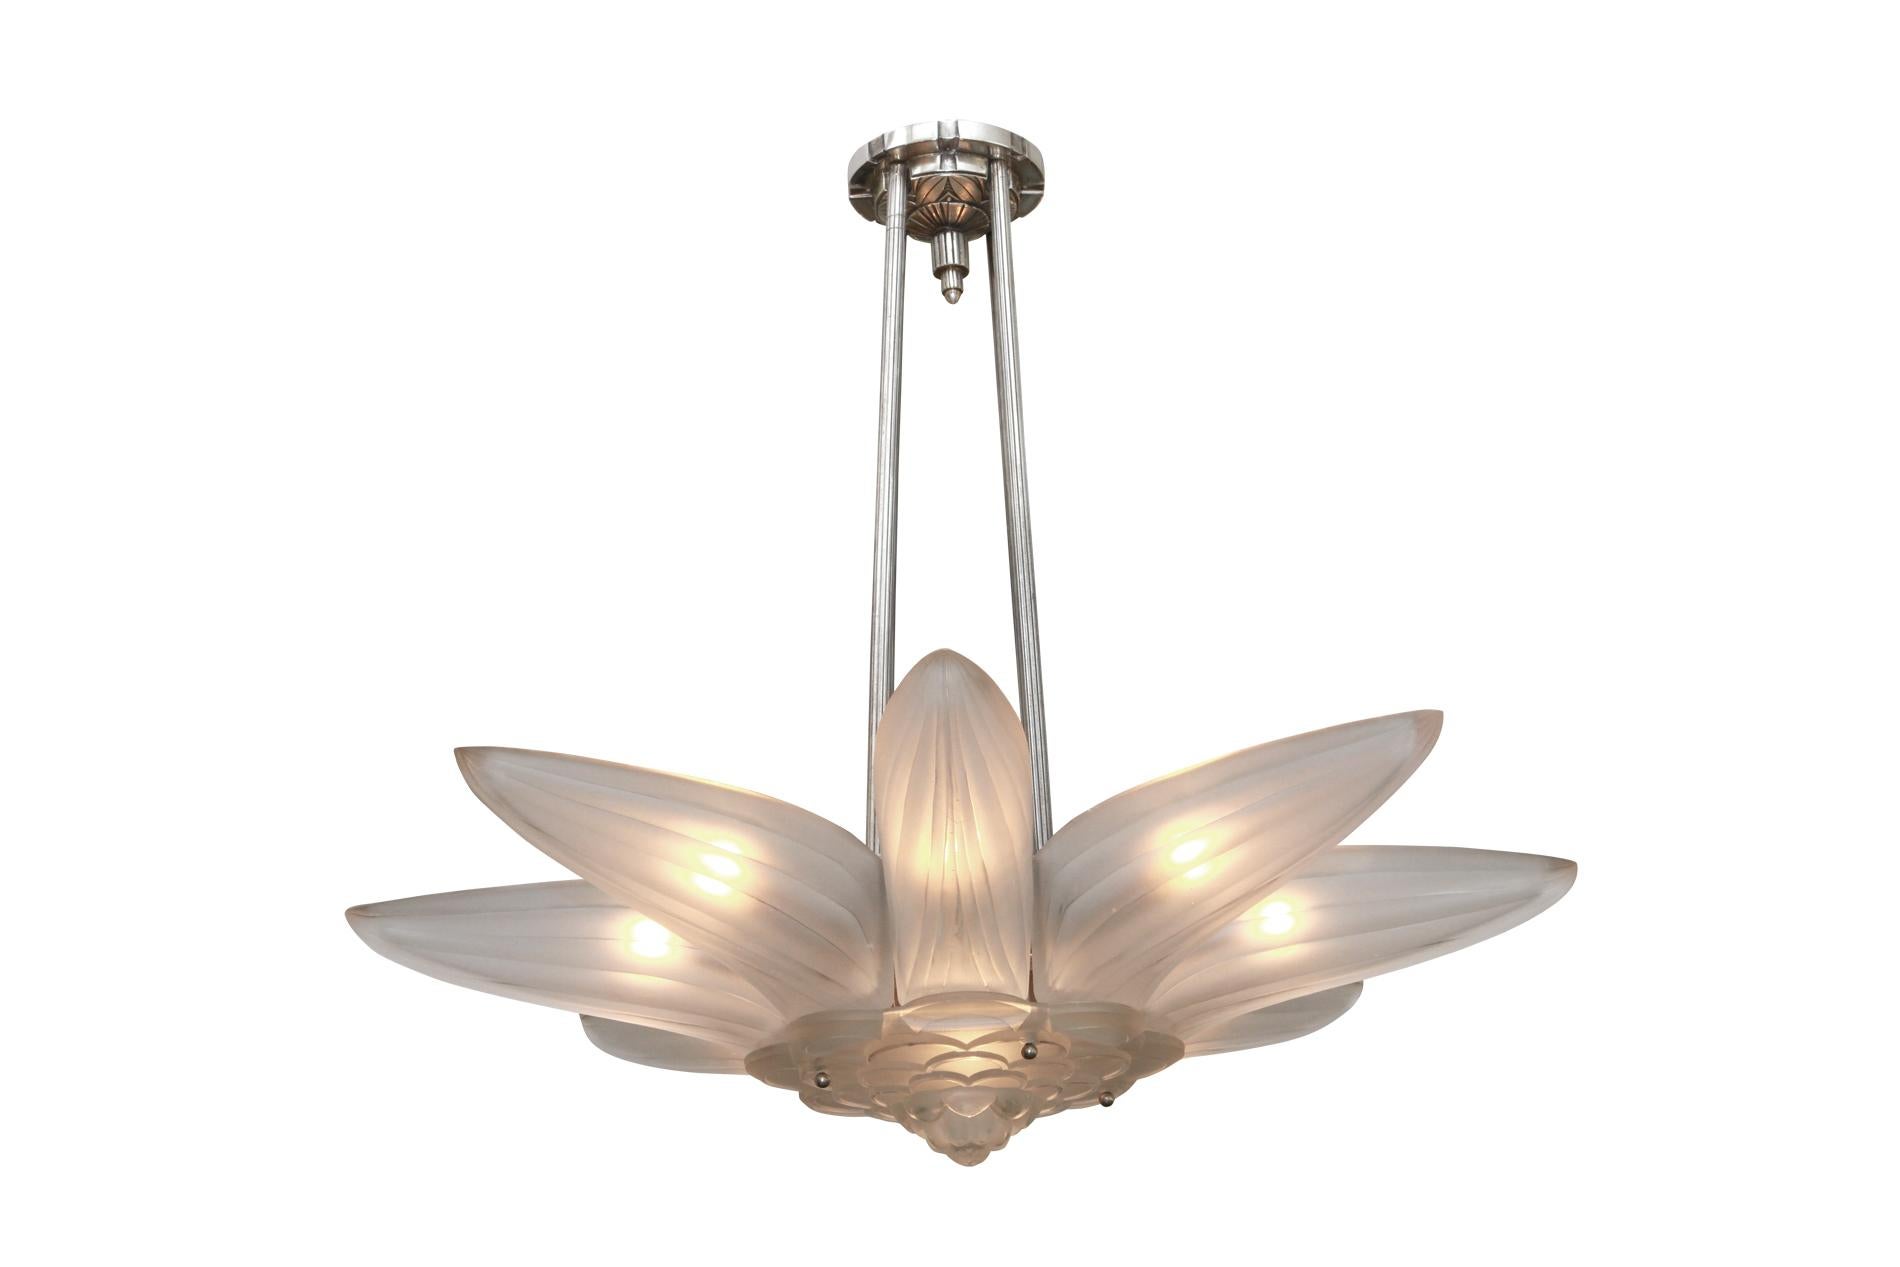 French Art Deco chandelier by Genet & Michon from 1930. Exceptional and rare piece made in all glass with original nickeled bronze structure 19representing a flower. Delicate and elegant, this ceiling light represents the manufacture artwork from